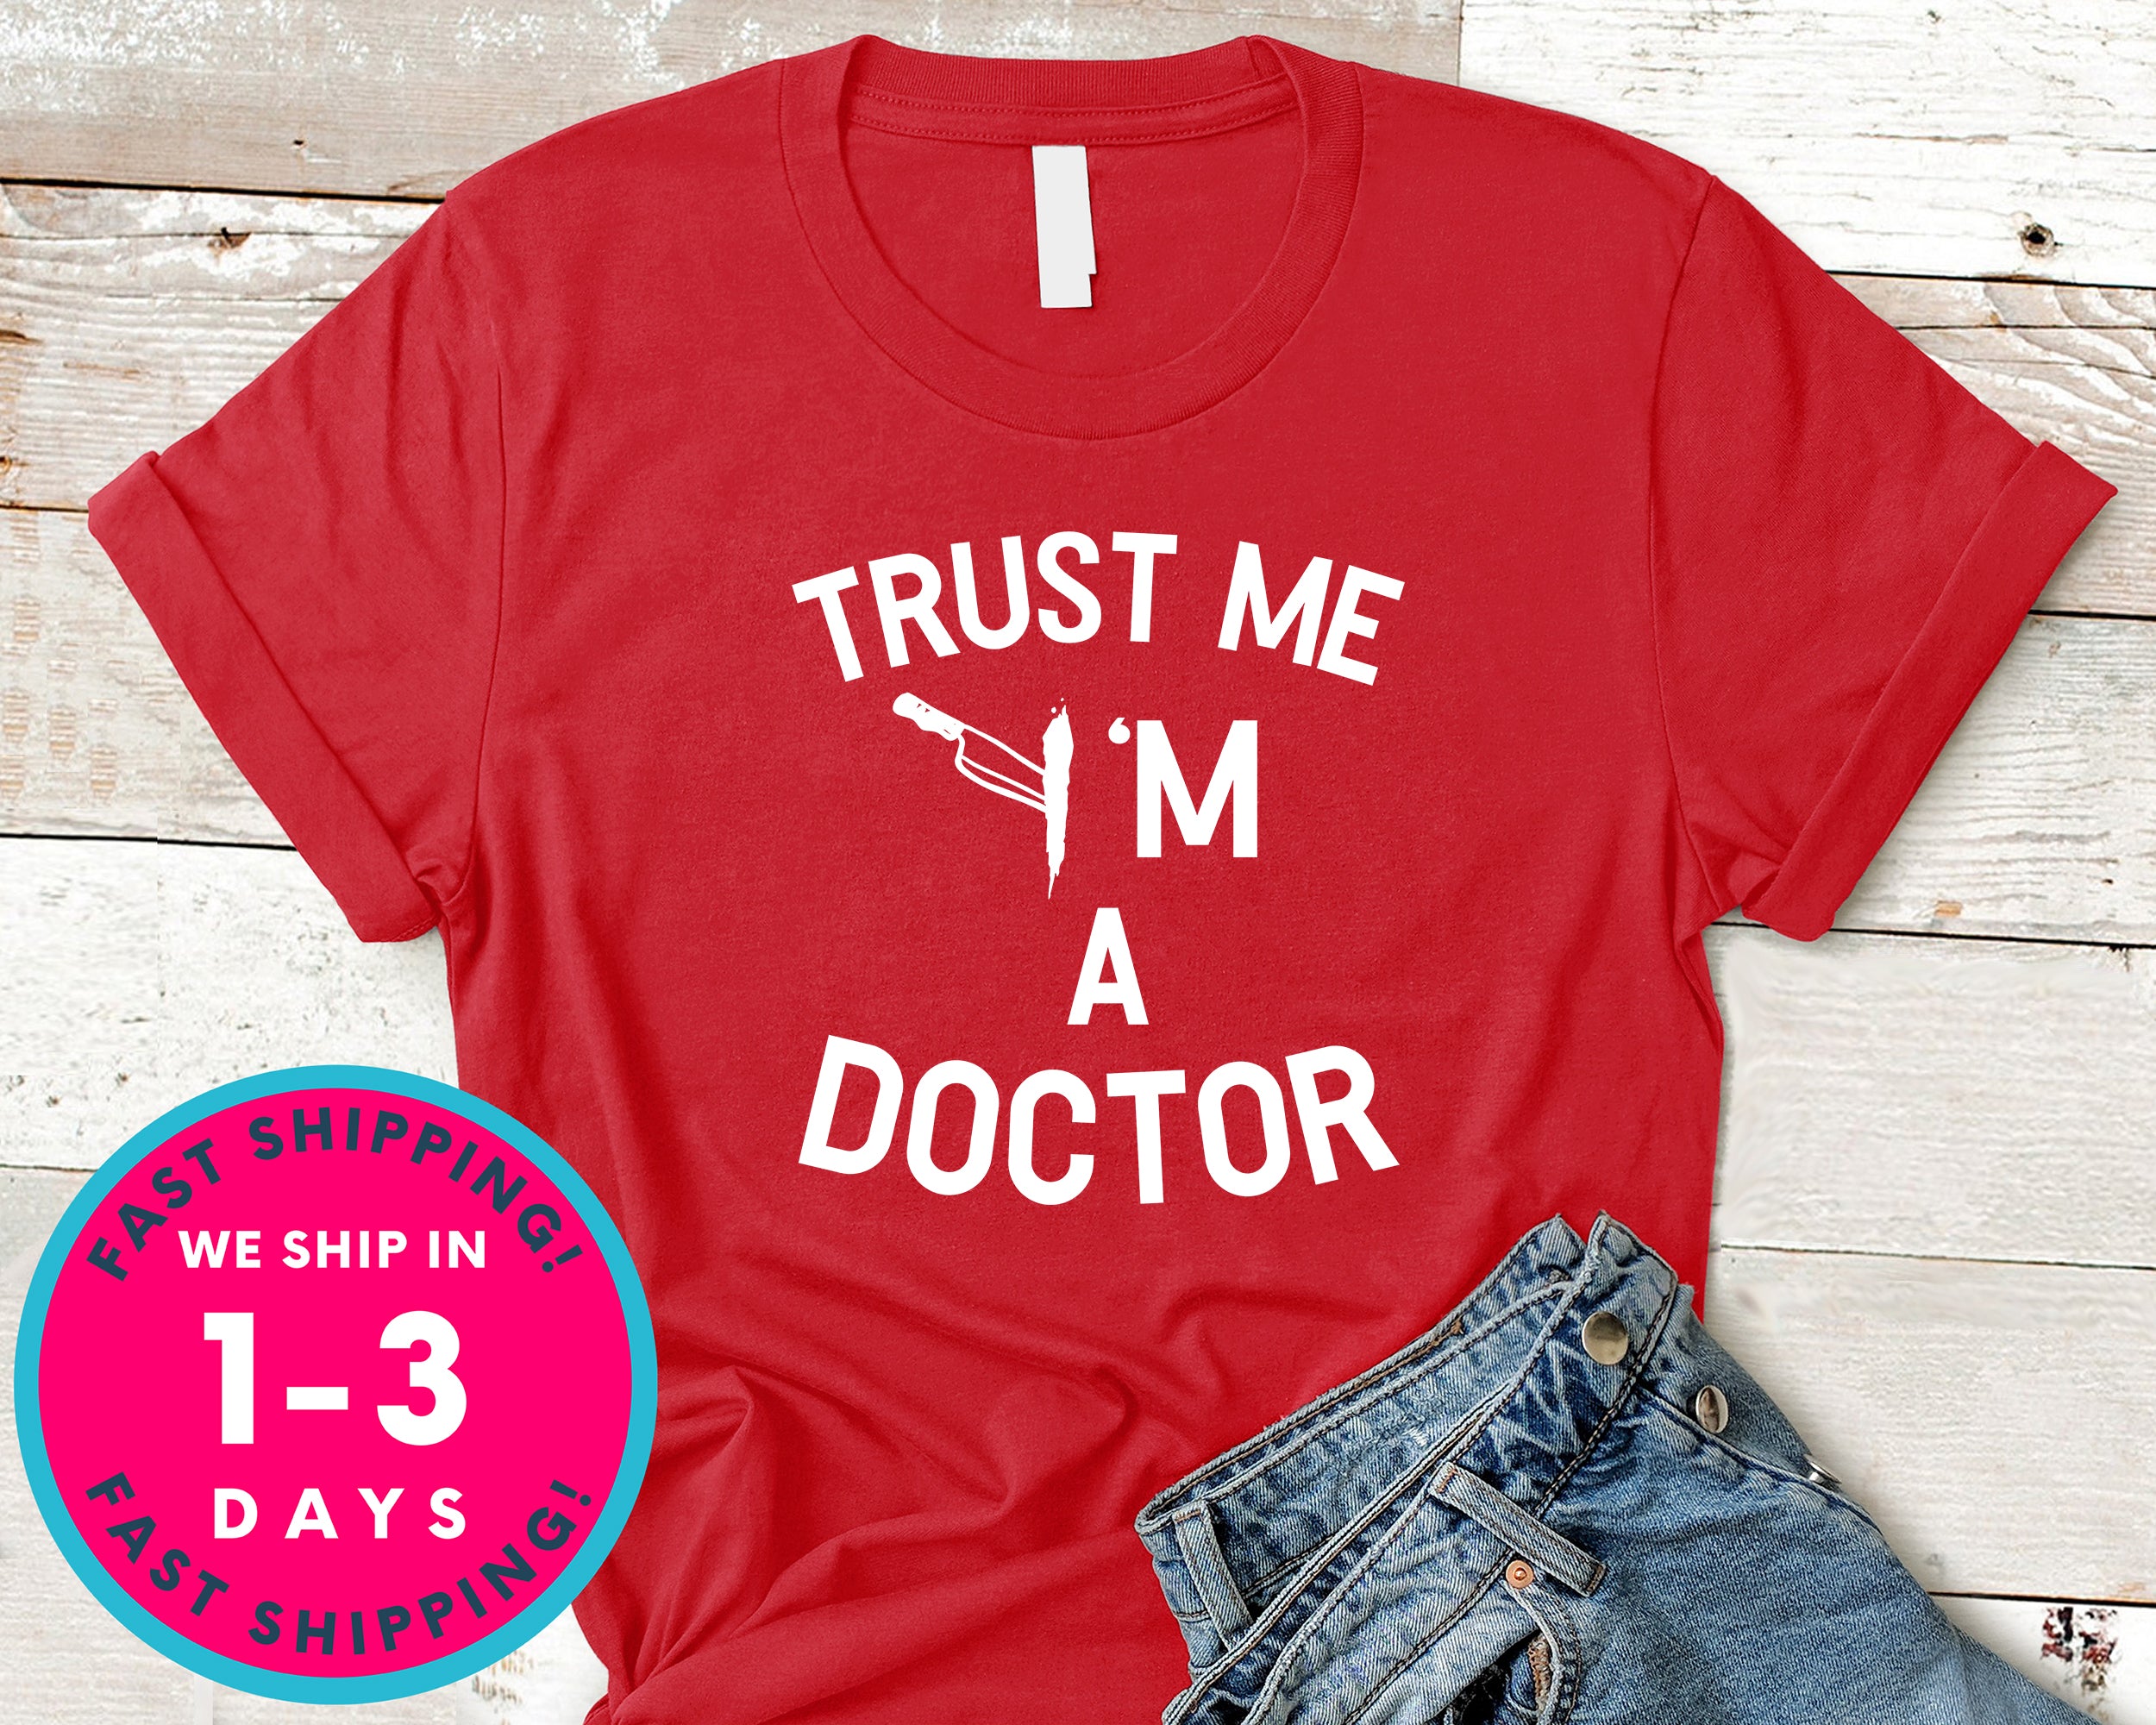 Trust Me I'm A Doctor Funny T-Shirt - Halloween Horror Scary Shirt